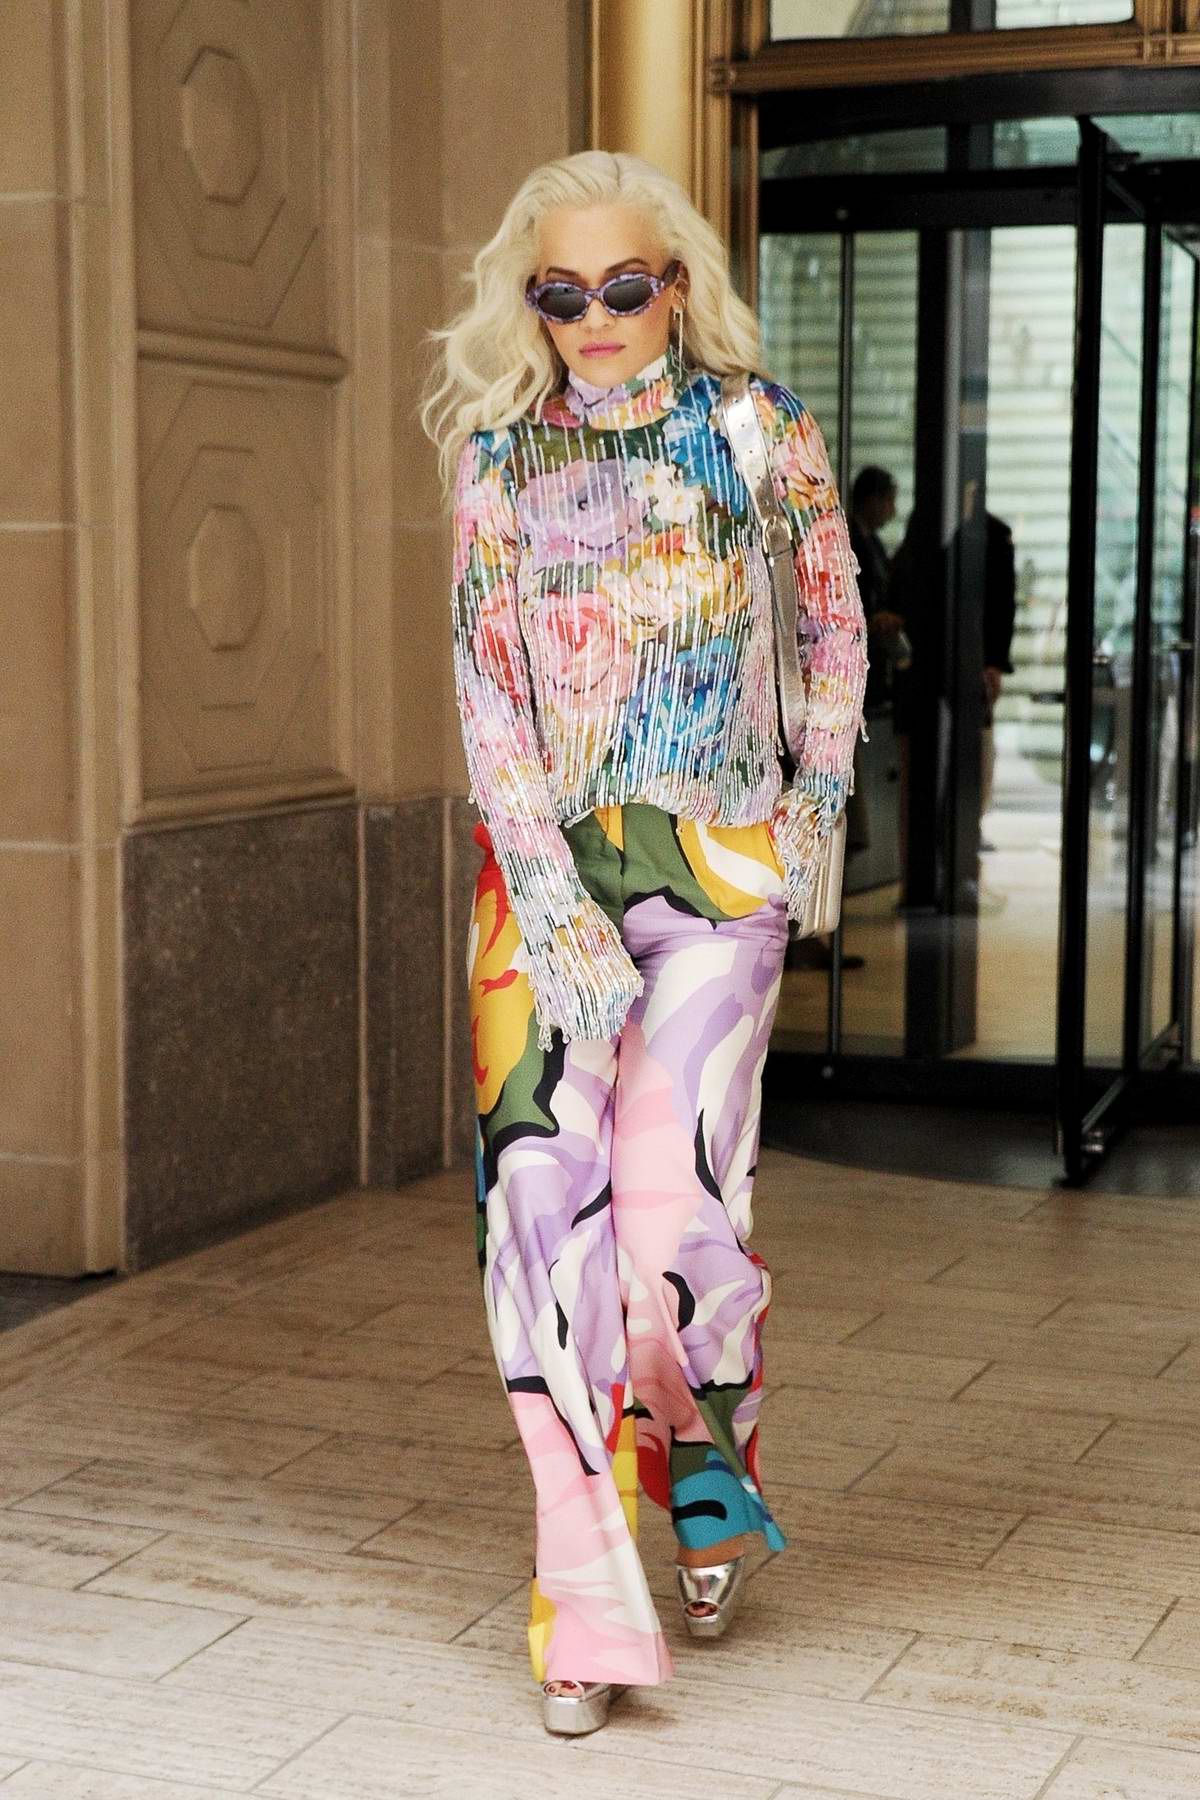 rita ora looks vibrant in a colorful ensemble while heading out in new ...